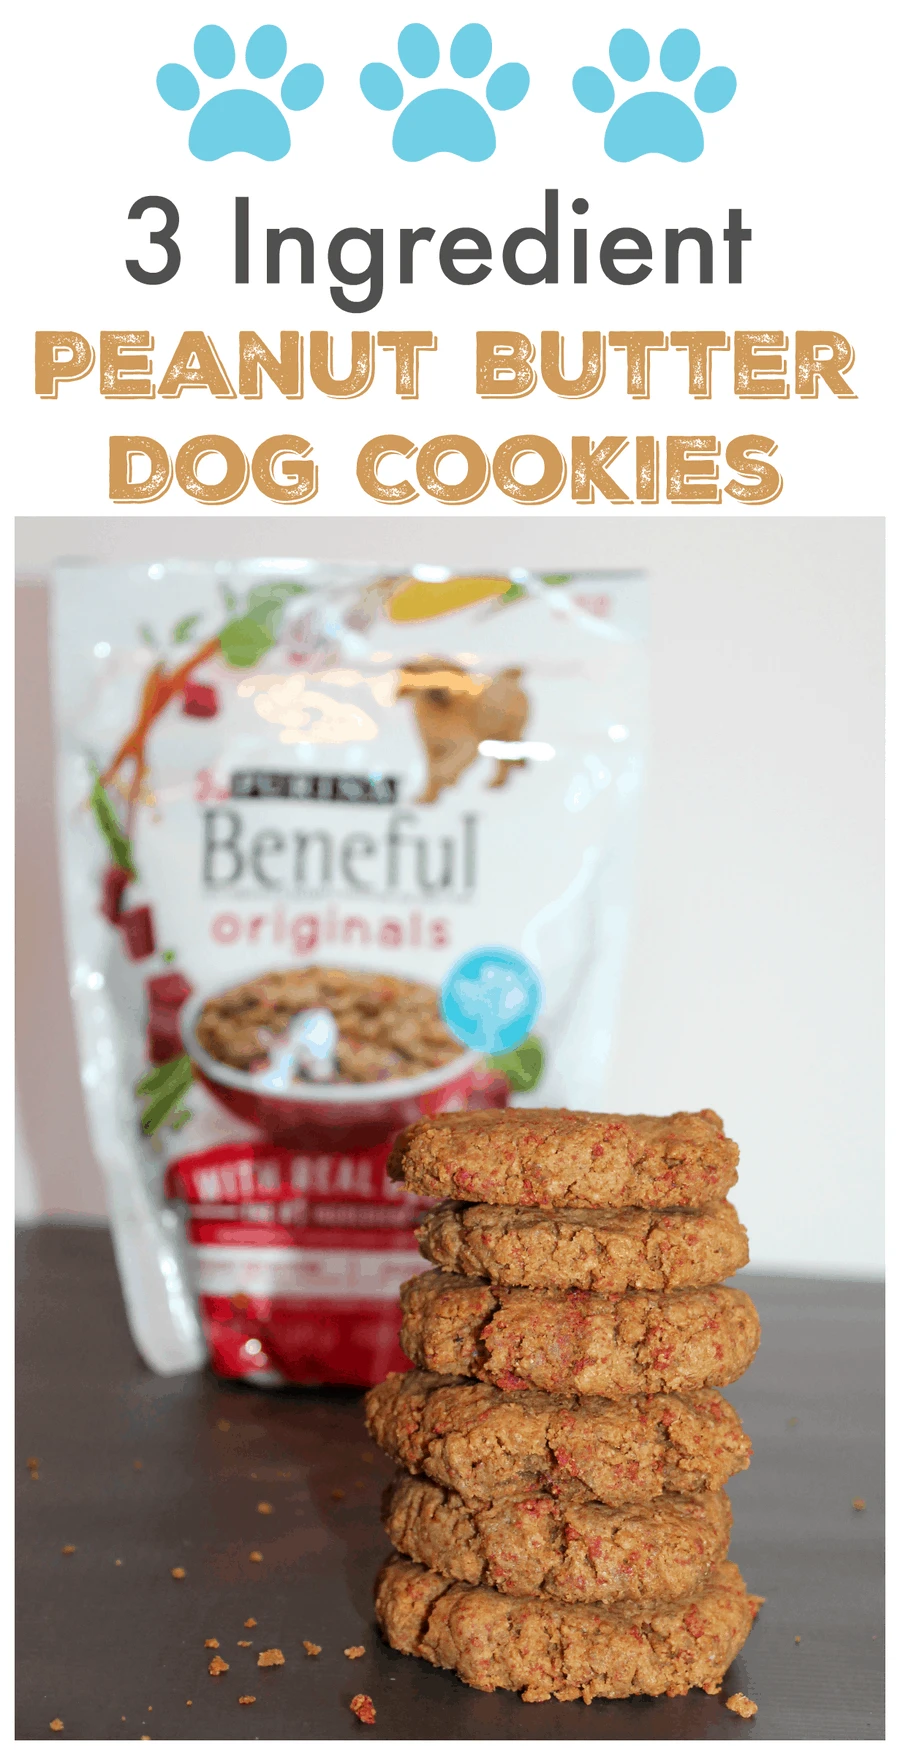 a stack of 3 Ingredient Dog Cookies